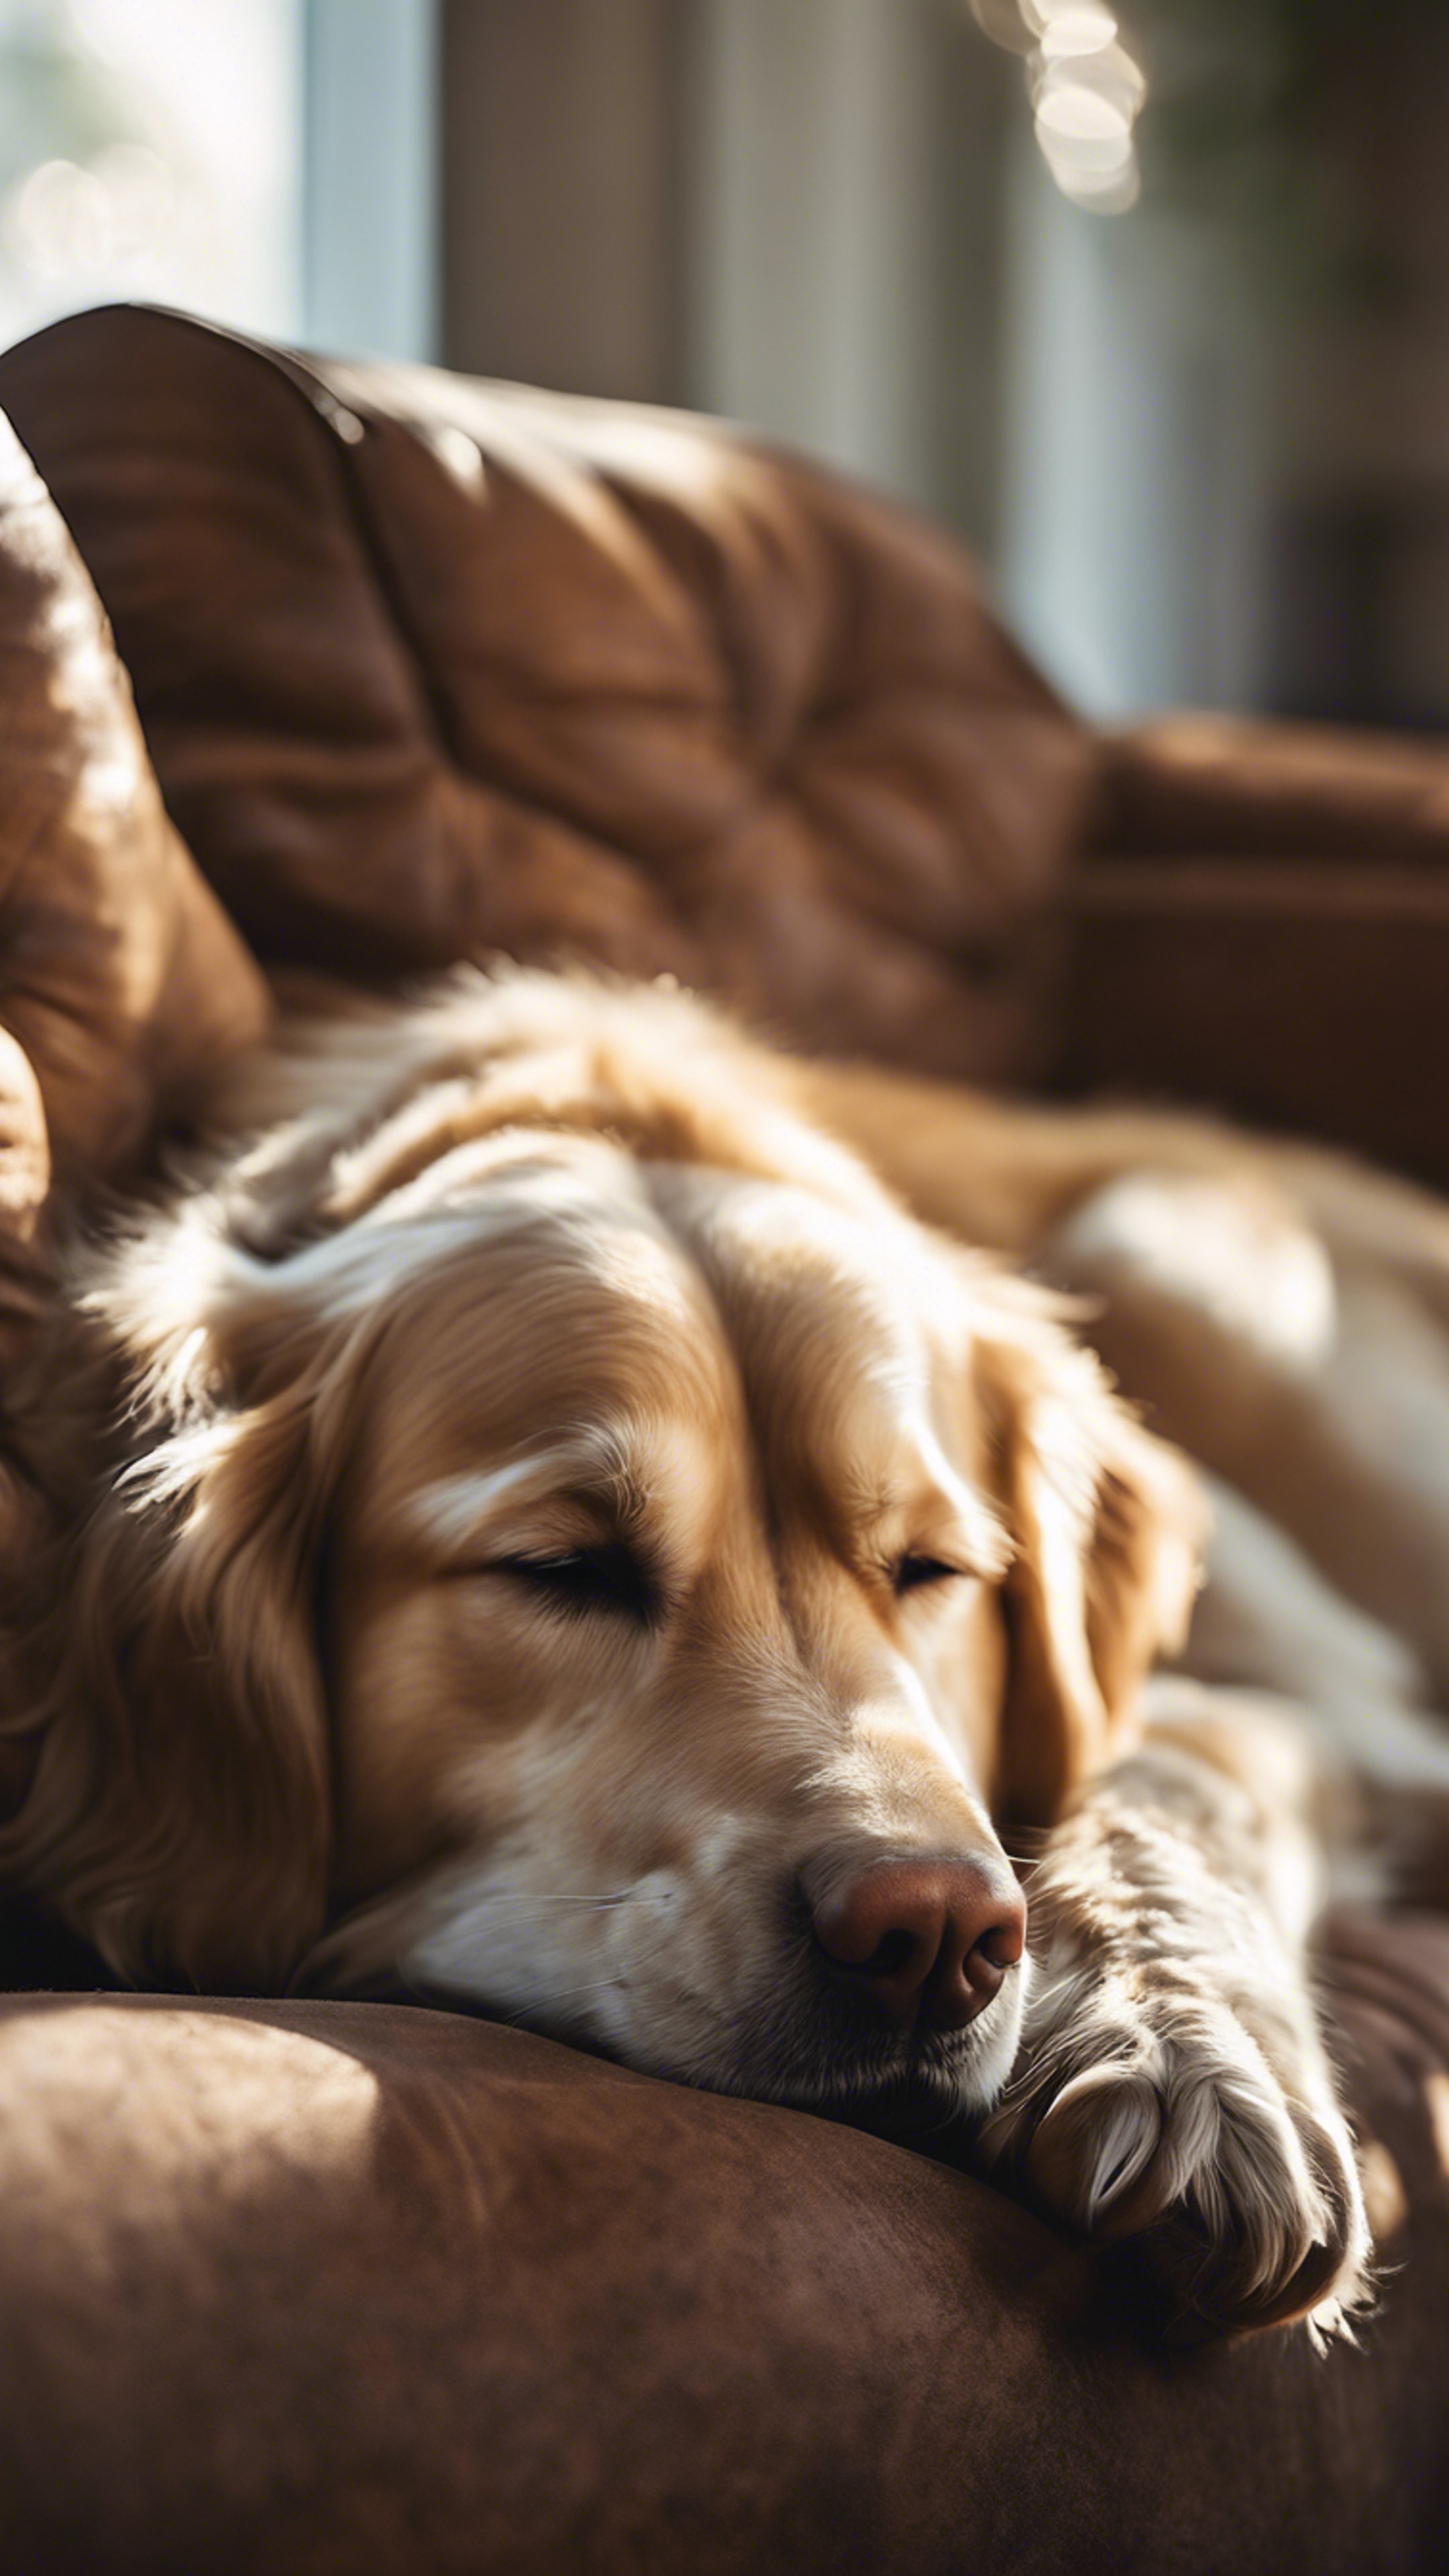 A sleeping Golden Retriever nestled on a cozy brown sofa with the morning sun pouring in.壁紙[a73b45c4c215415aa65f]